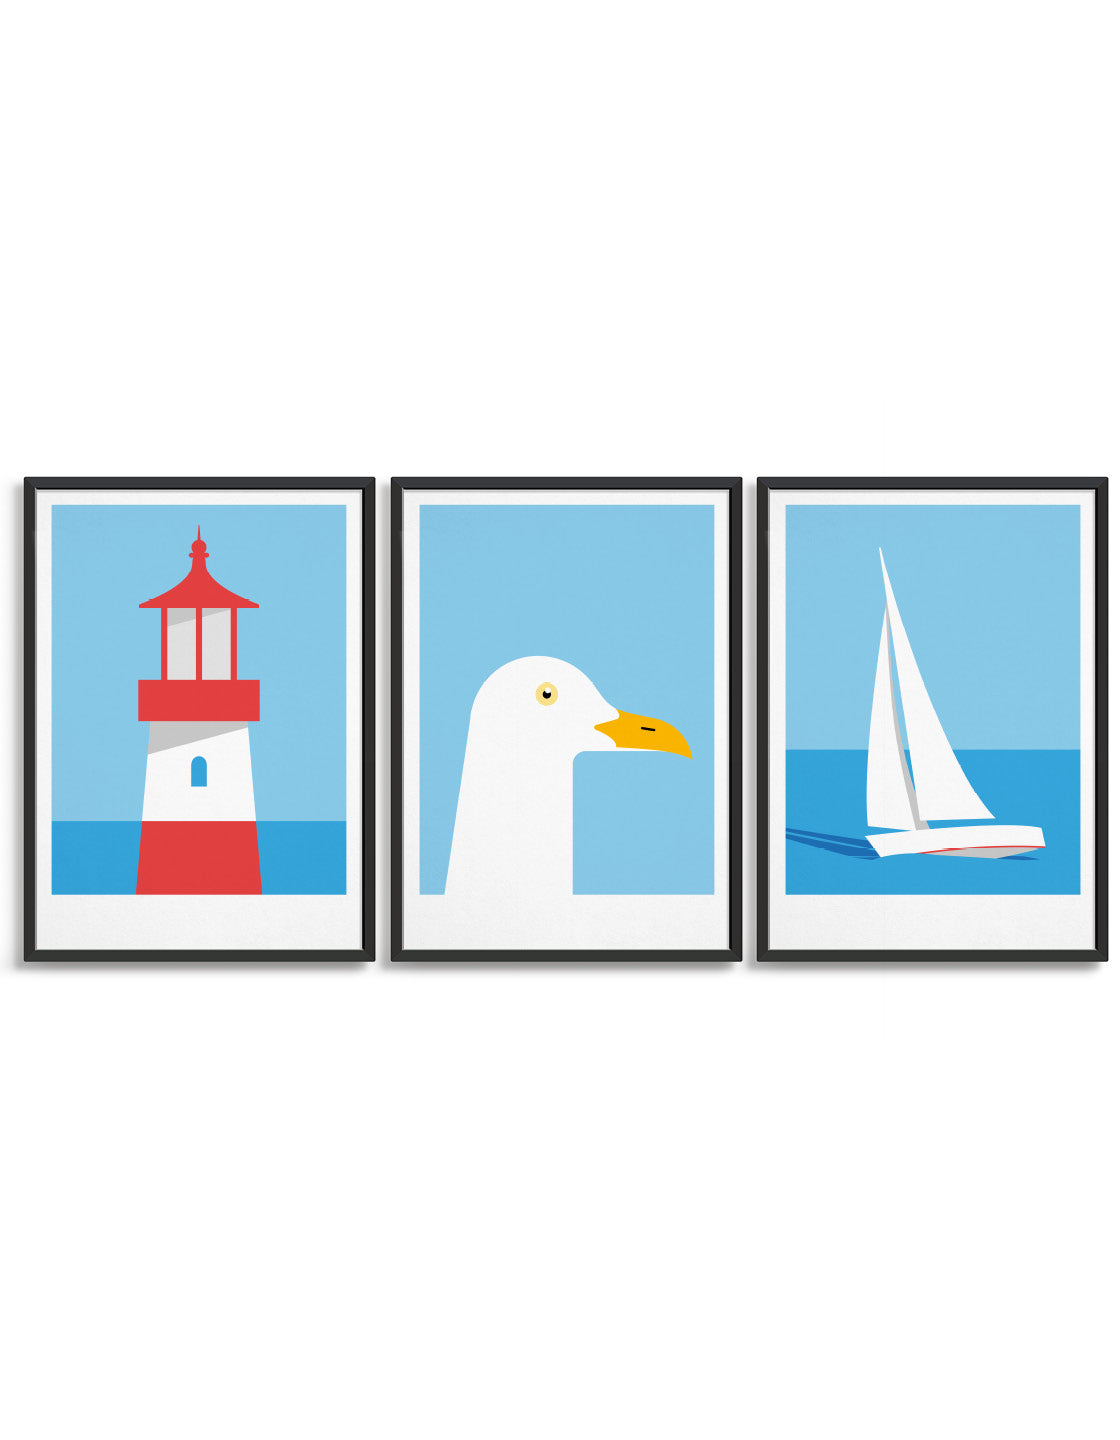 Image of our nautical trio, featuring a red and white lighthouse, a white seagul on a light blue background and a white sailing boat out at sea